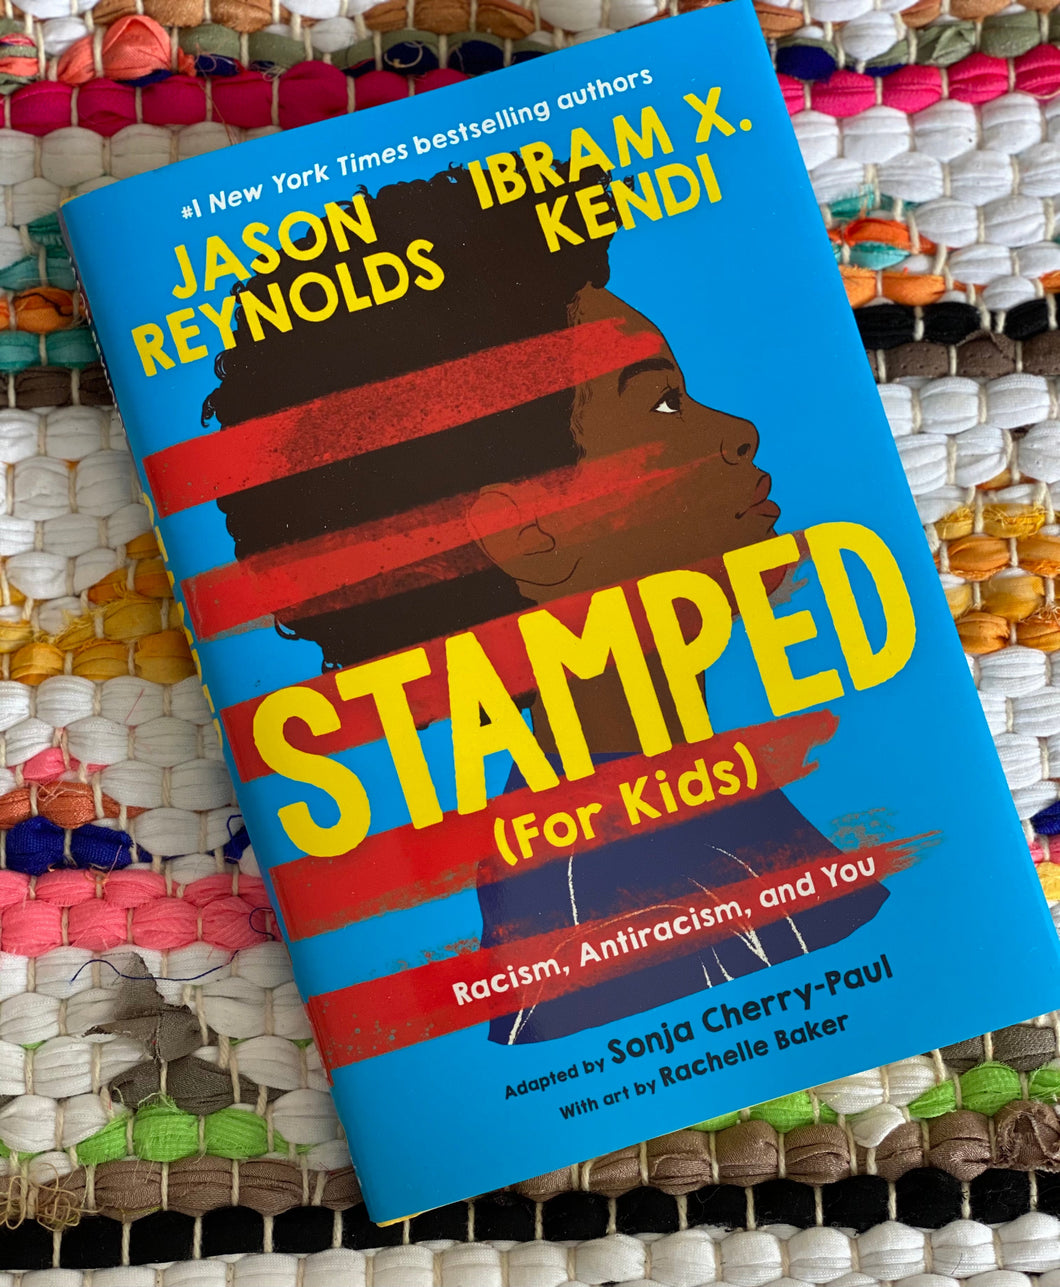 Stamped (For Kids) Racism, Antiracism, and You [SIGNED]  | Jason Reynolds by Ibram X. Kendi Adapted by Sonja Cherry-Paul Illustrated by Rachelle Baker